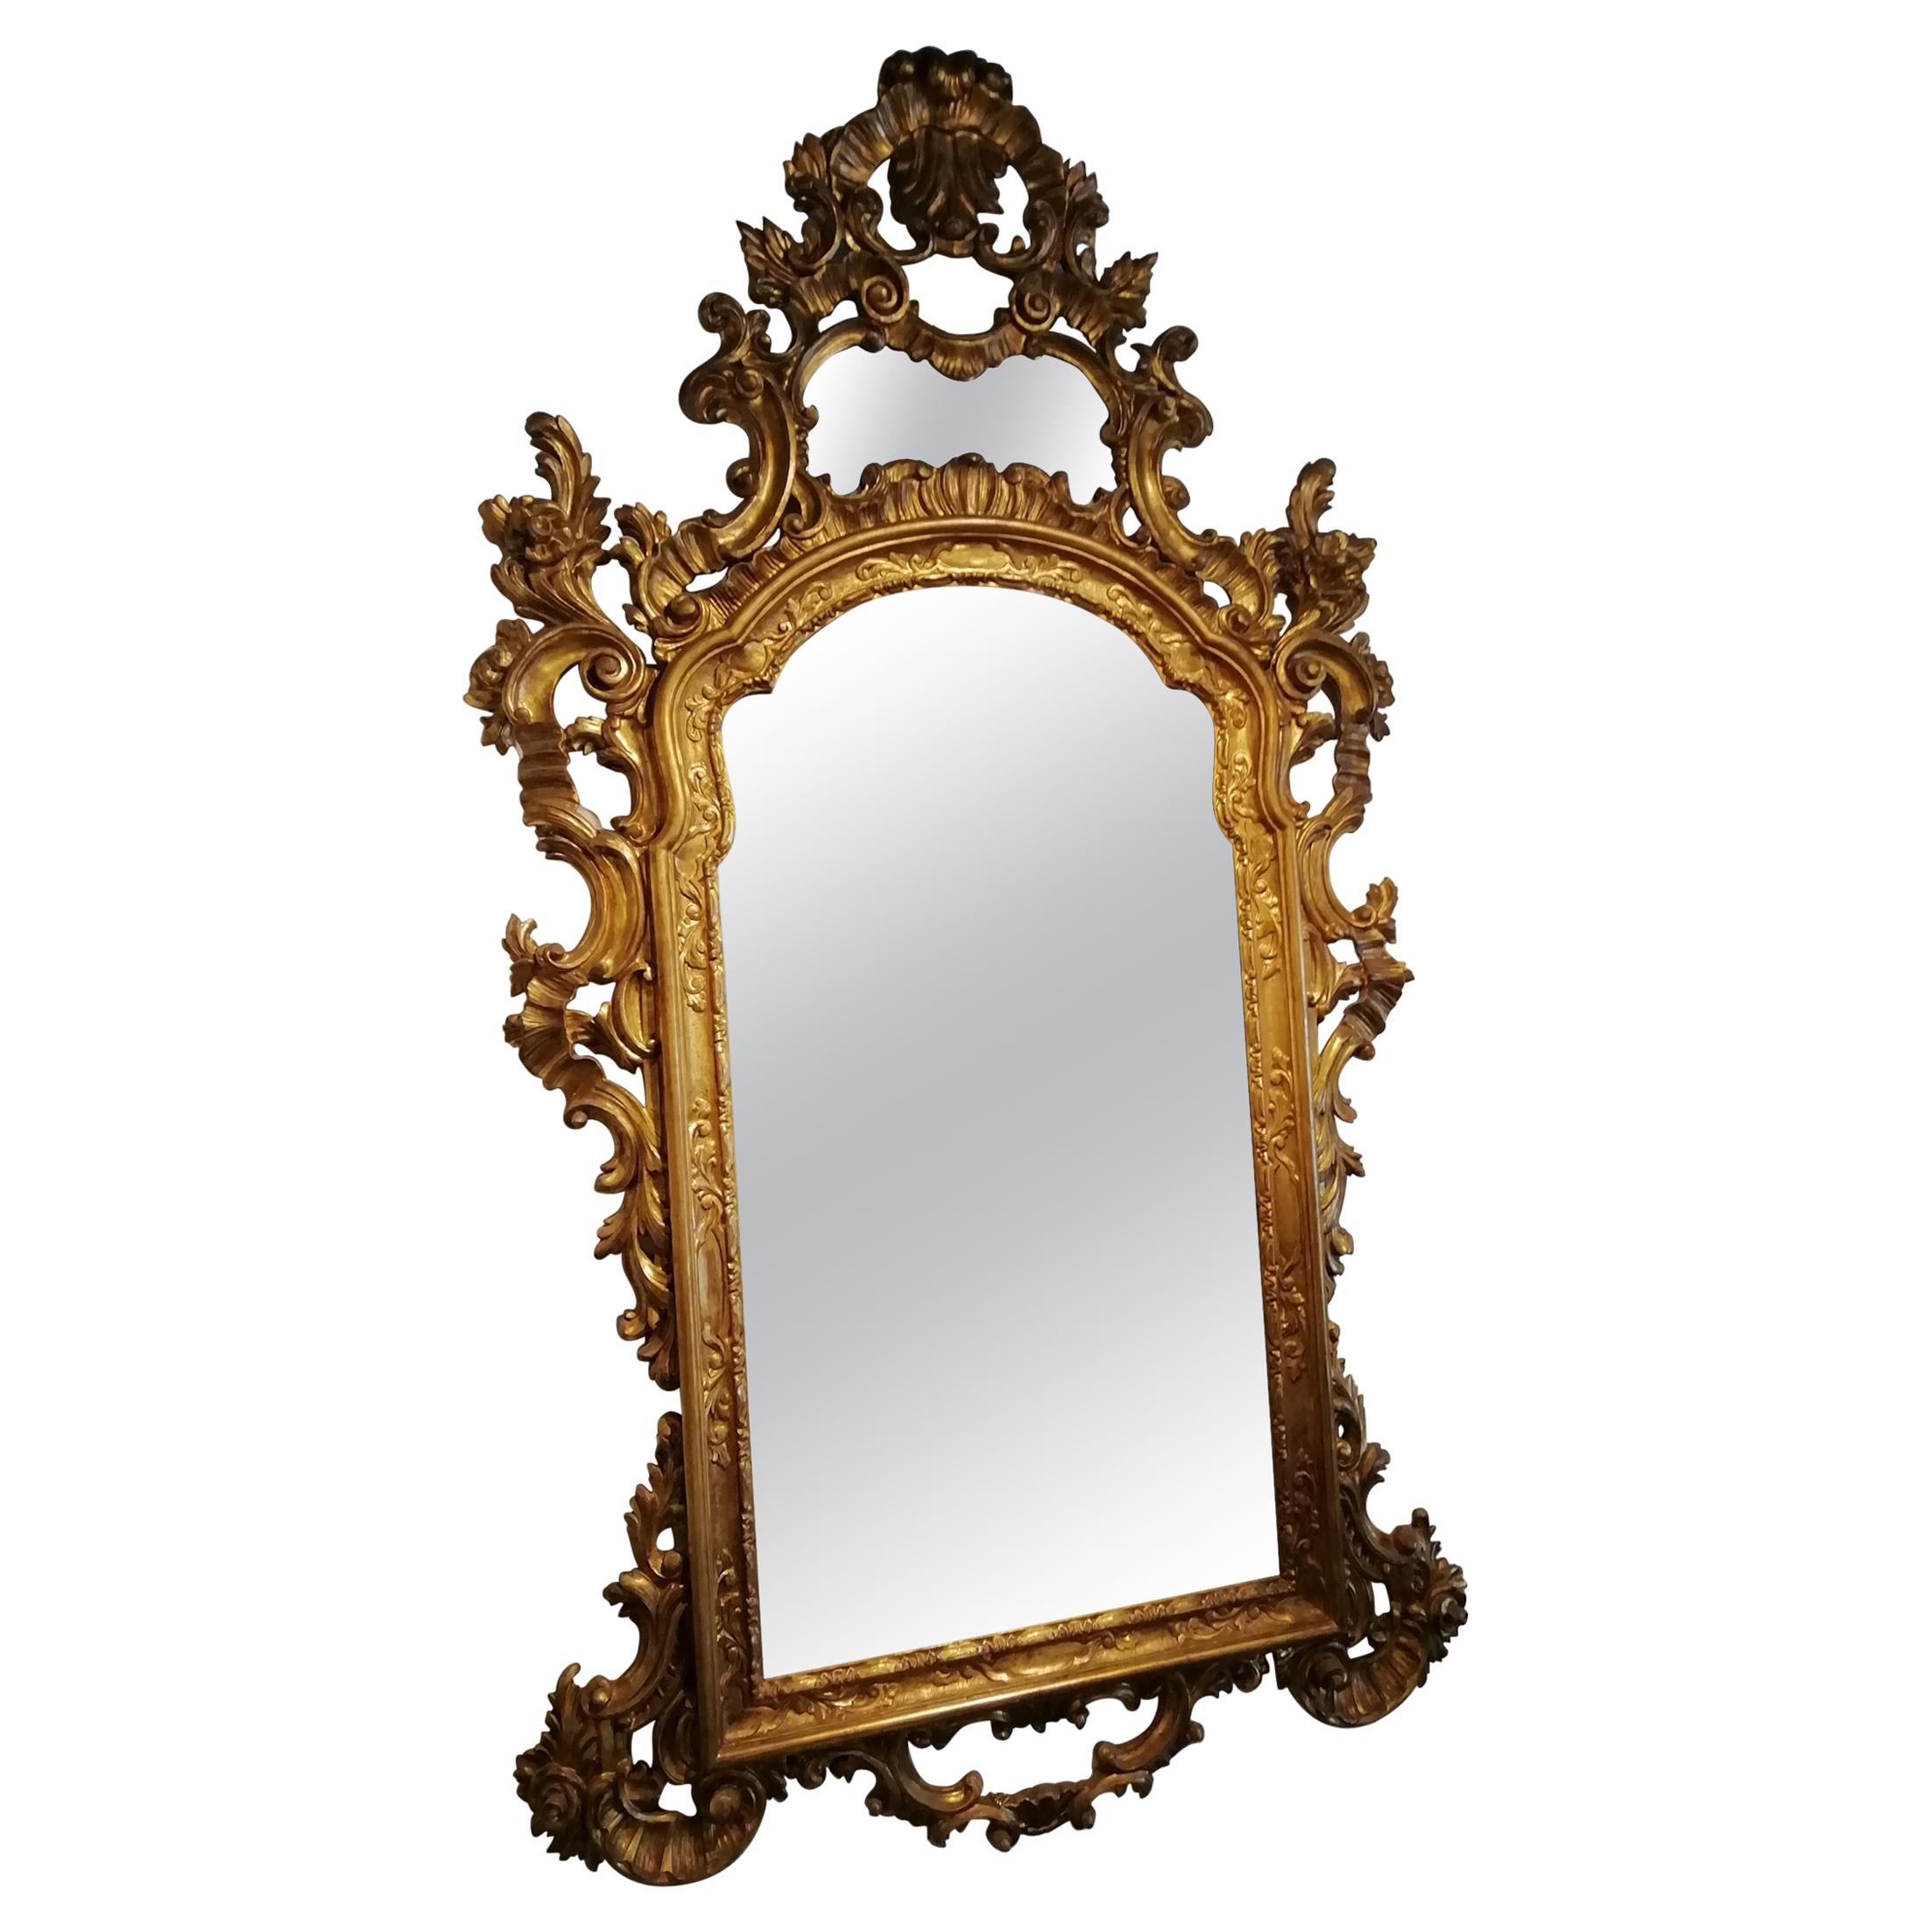 Venetian Mirror, Carved Golden Wood Gold Leaf Italian Manufacture, 20th Century For Sale